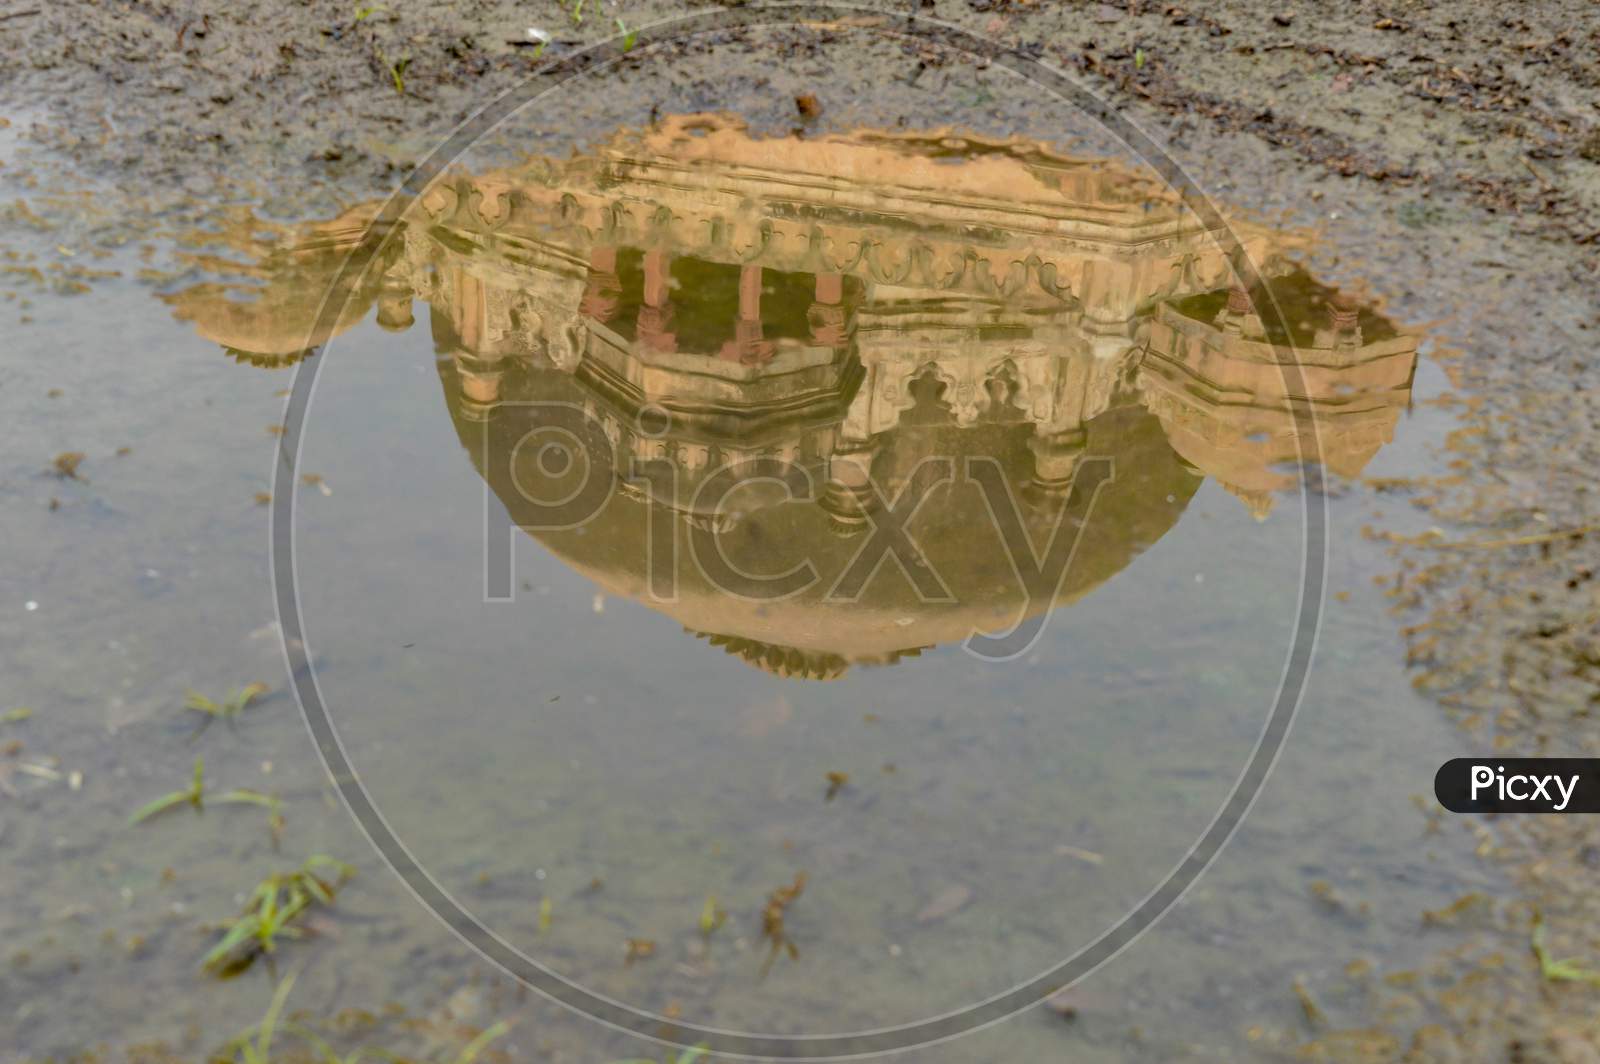 A Reflection In Water Of Tomb Of Sikandar Lodhi Monument At Lodi Garden Or Lodhi Gardens In A City Park From The Side Of The Lawn At Winter Foggy Morning.